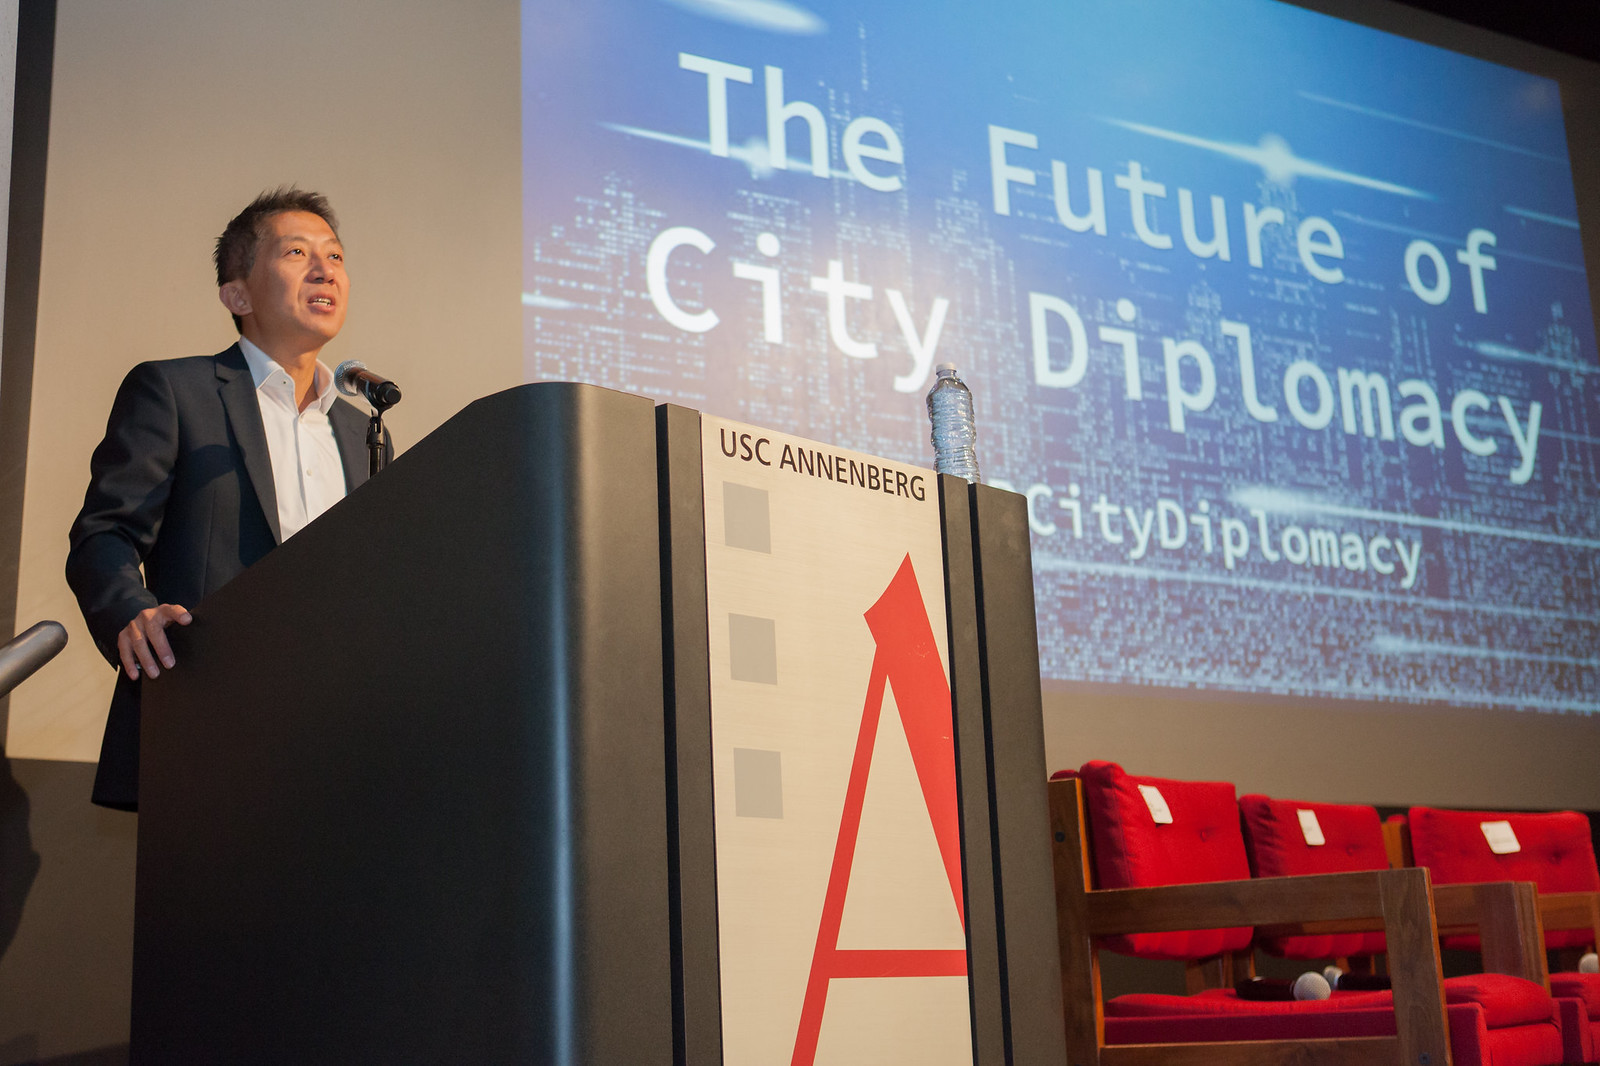 The Future of City Diplomacy